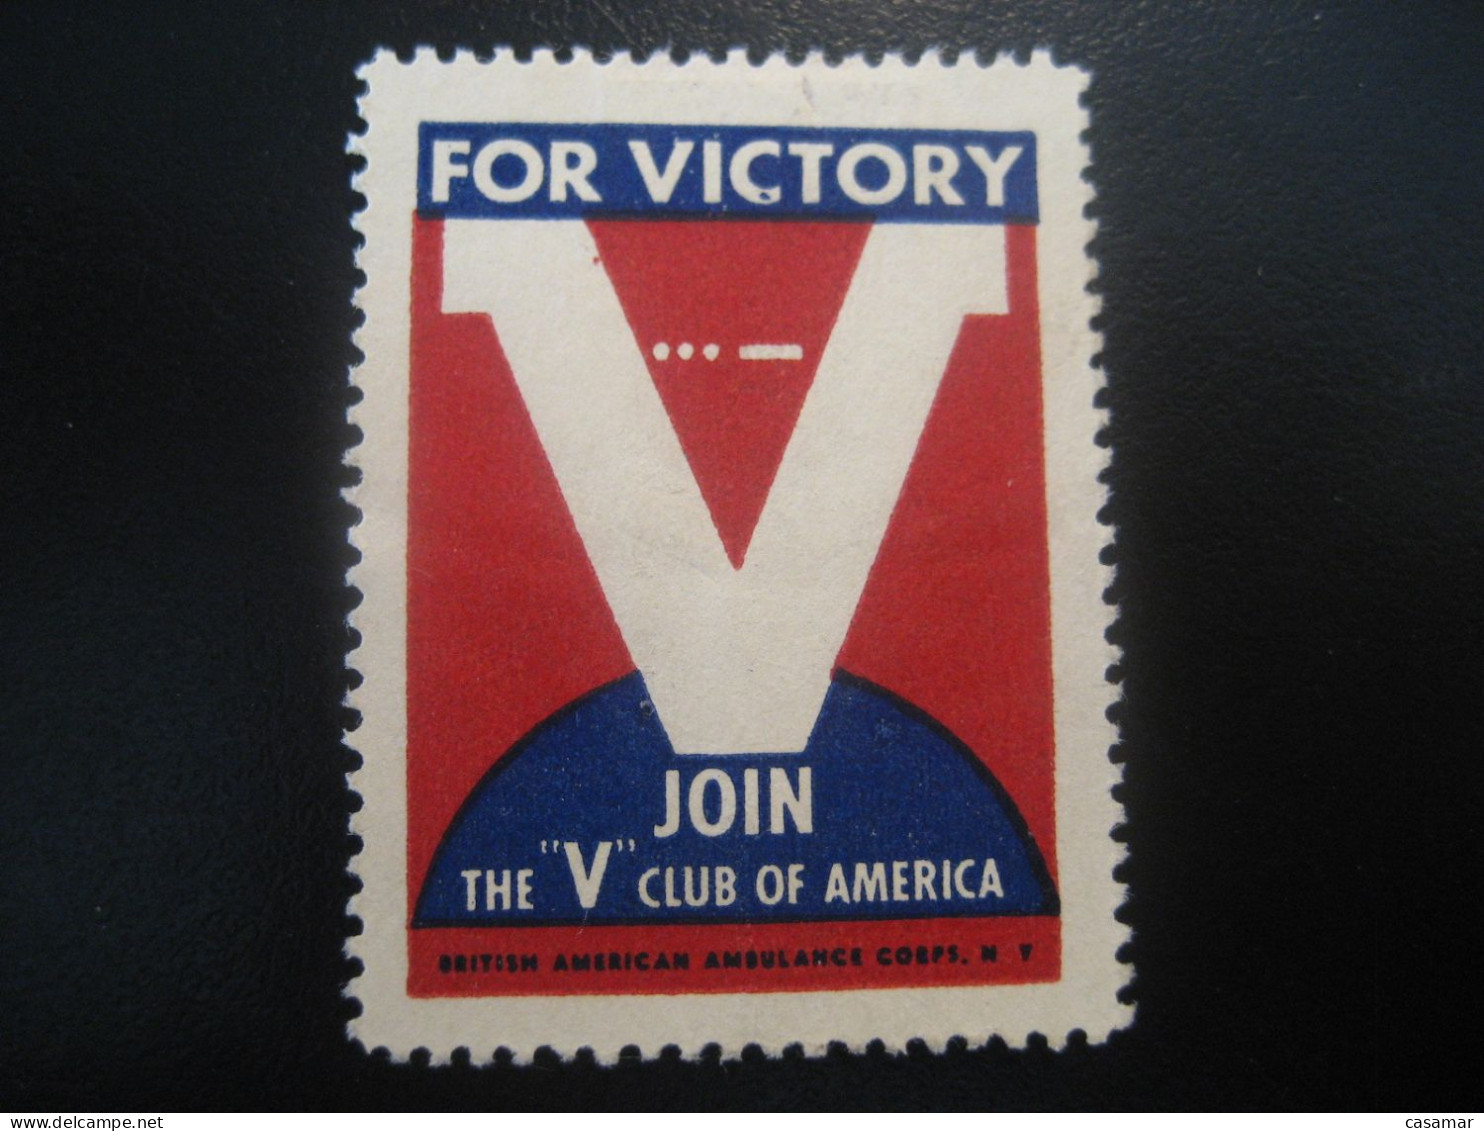 V For Victory Join The V Club Of America WW2 WWII Military War Poster Stamp Vignette USA Label - WW2